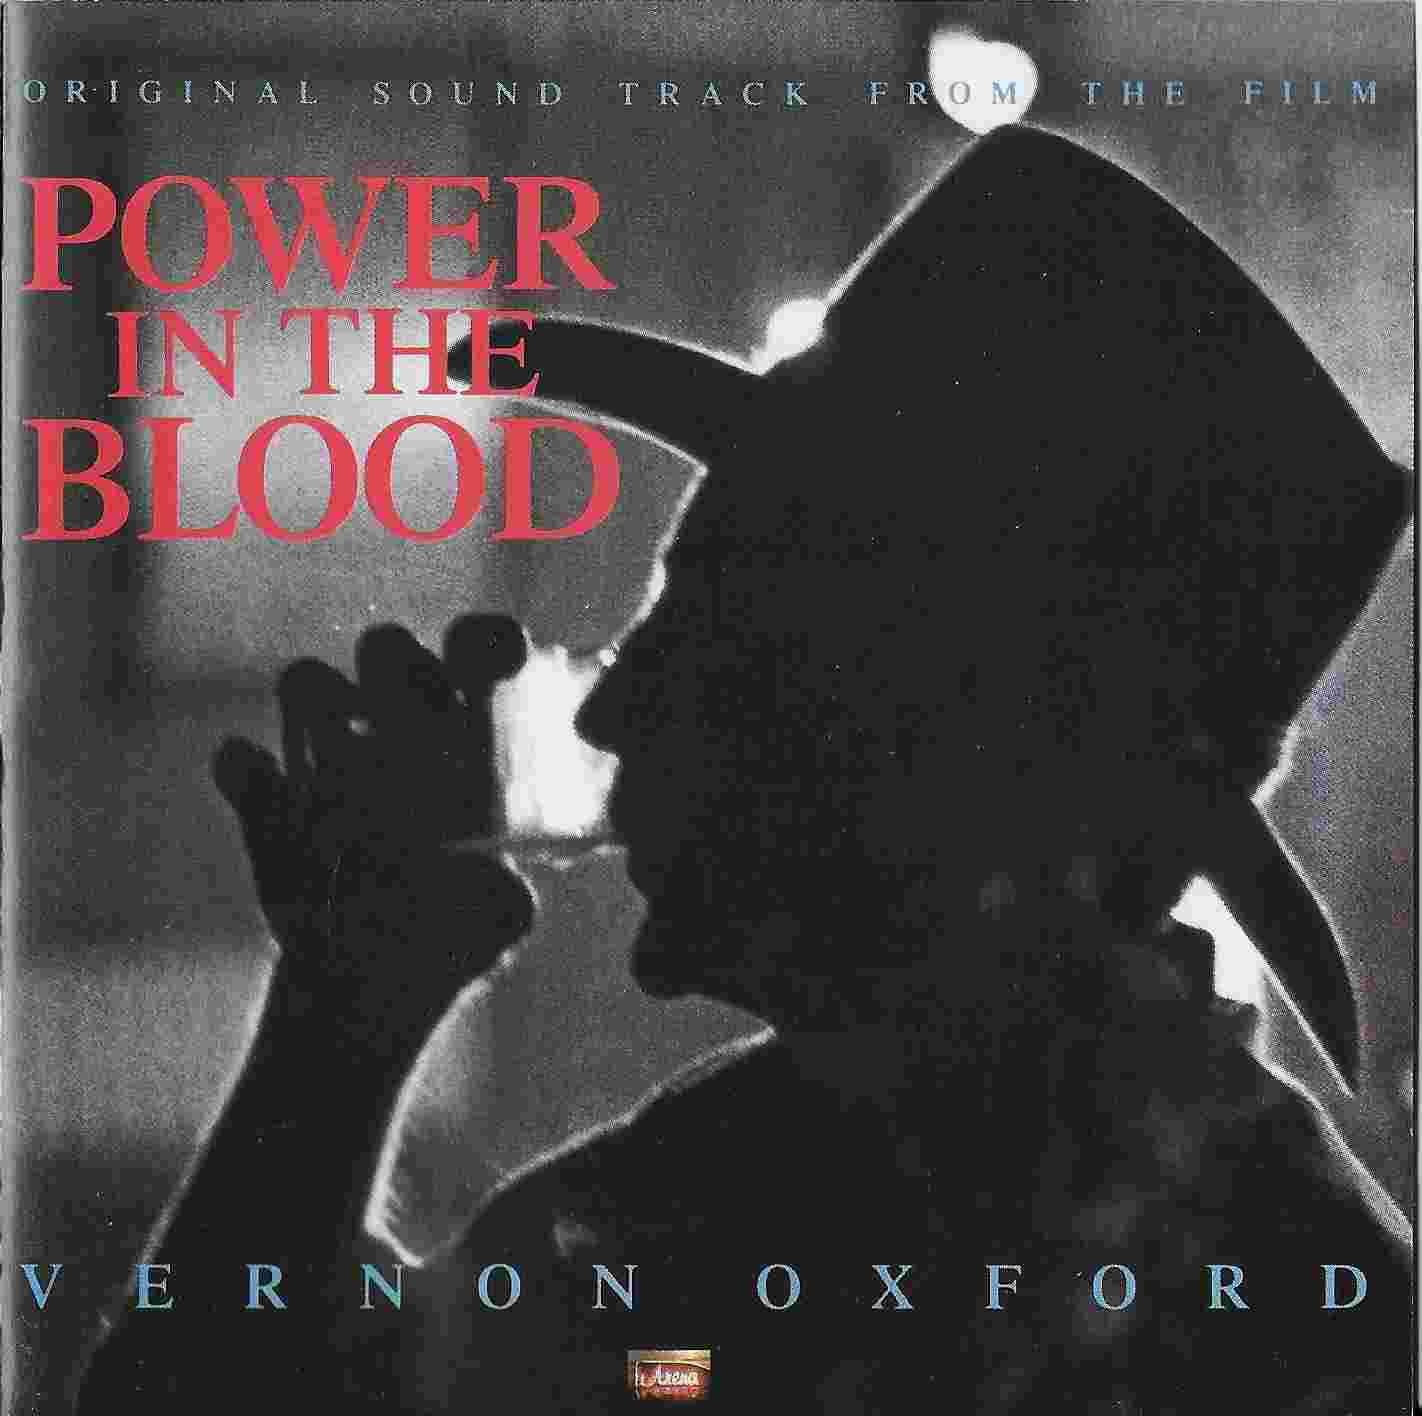 Picture of BBCCD729 Power in the blood - Vernon Oxford by artist Vernon Oxford from the BBC cds - Records and Tapes library